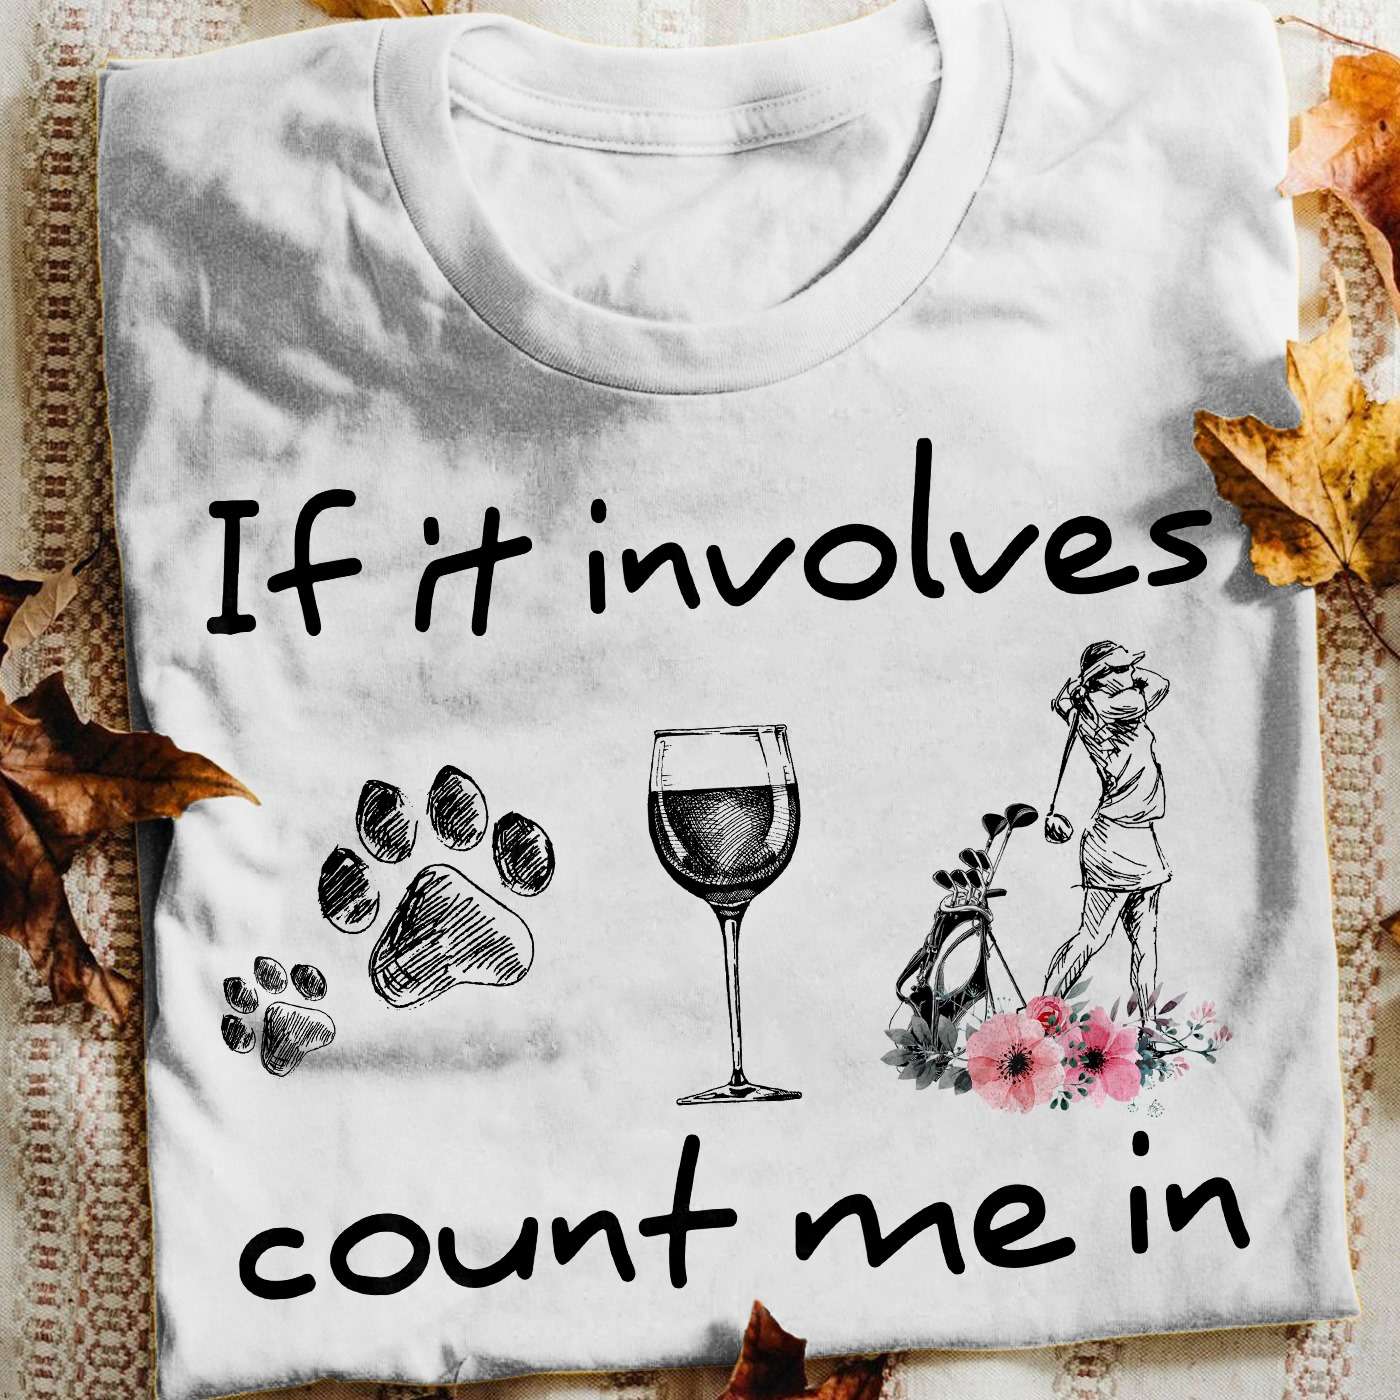 If it involves count me in - Dog and wine, woman the golfer